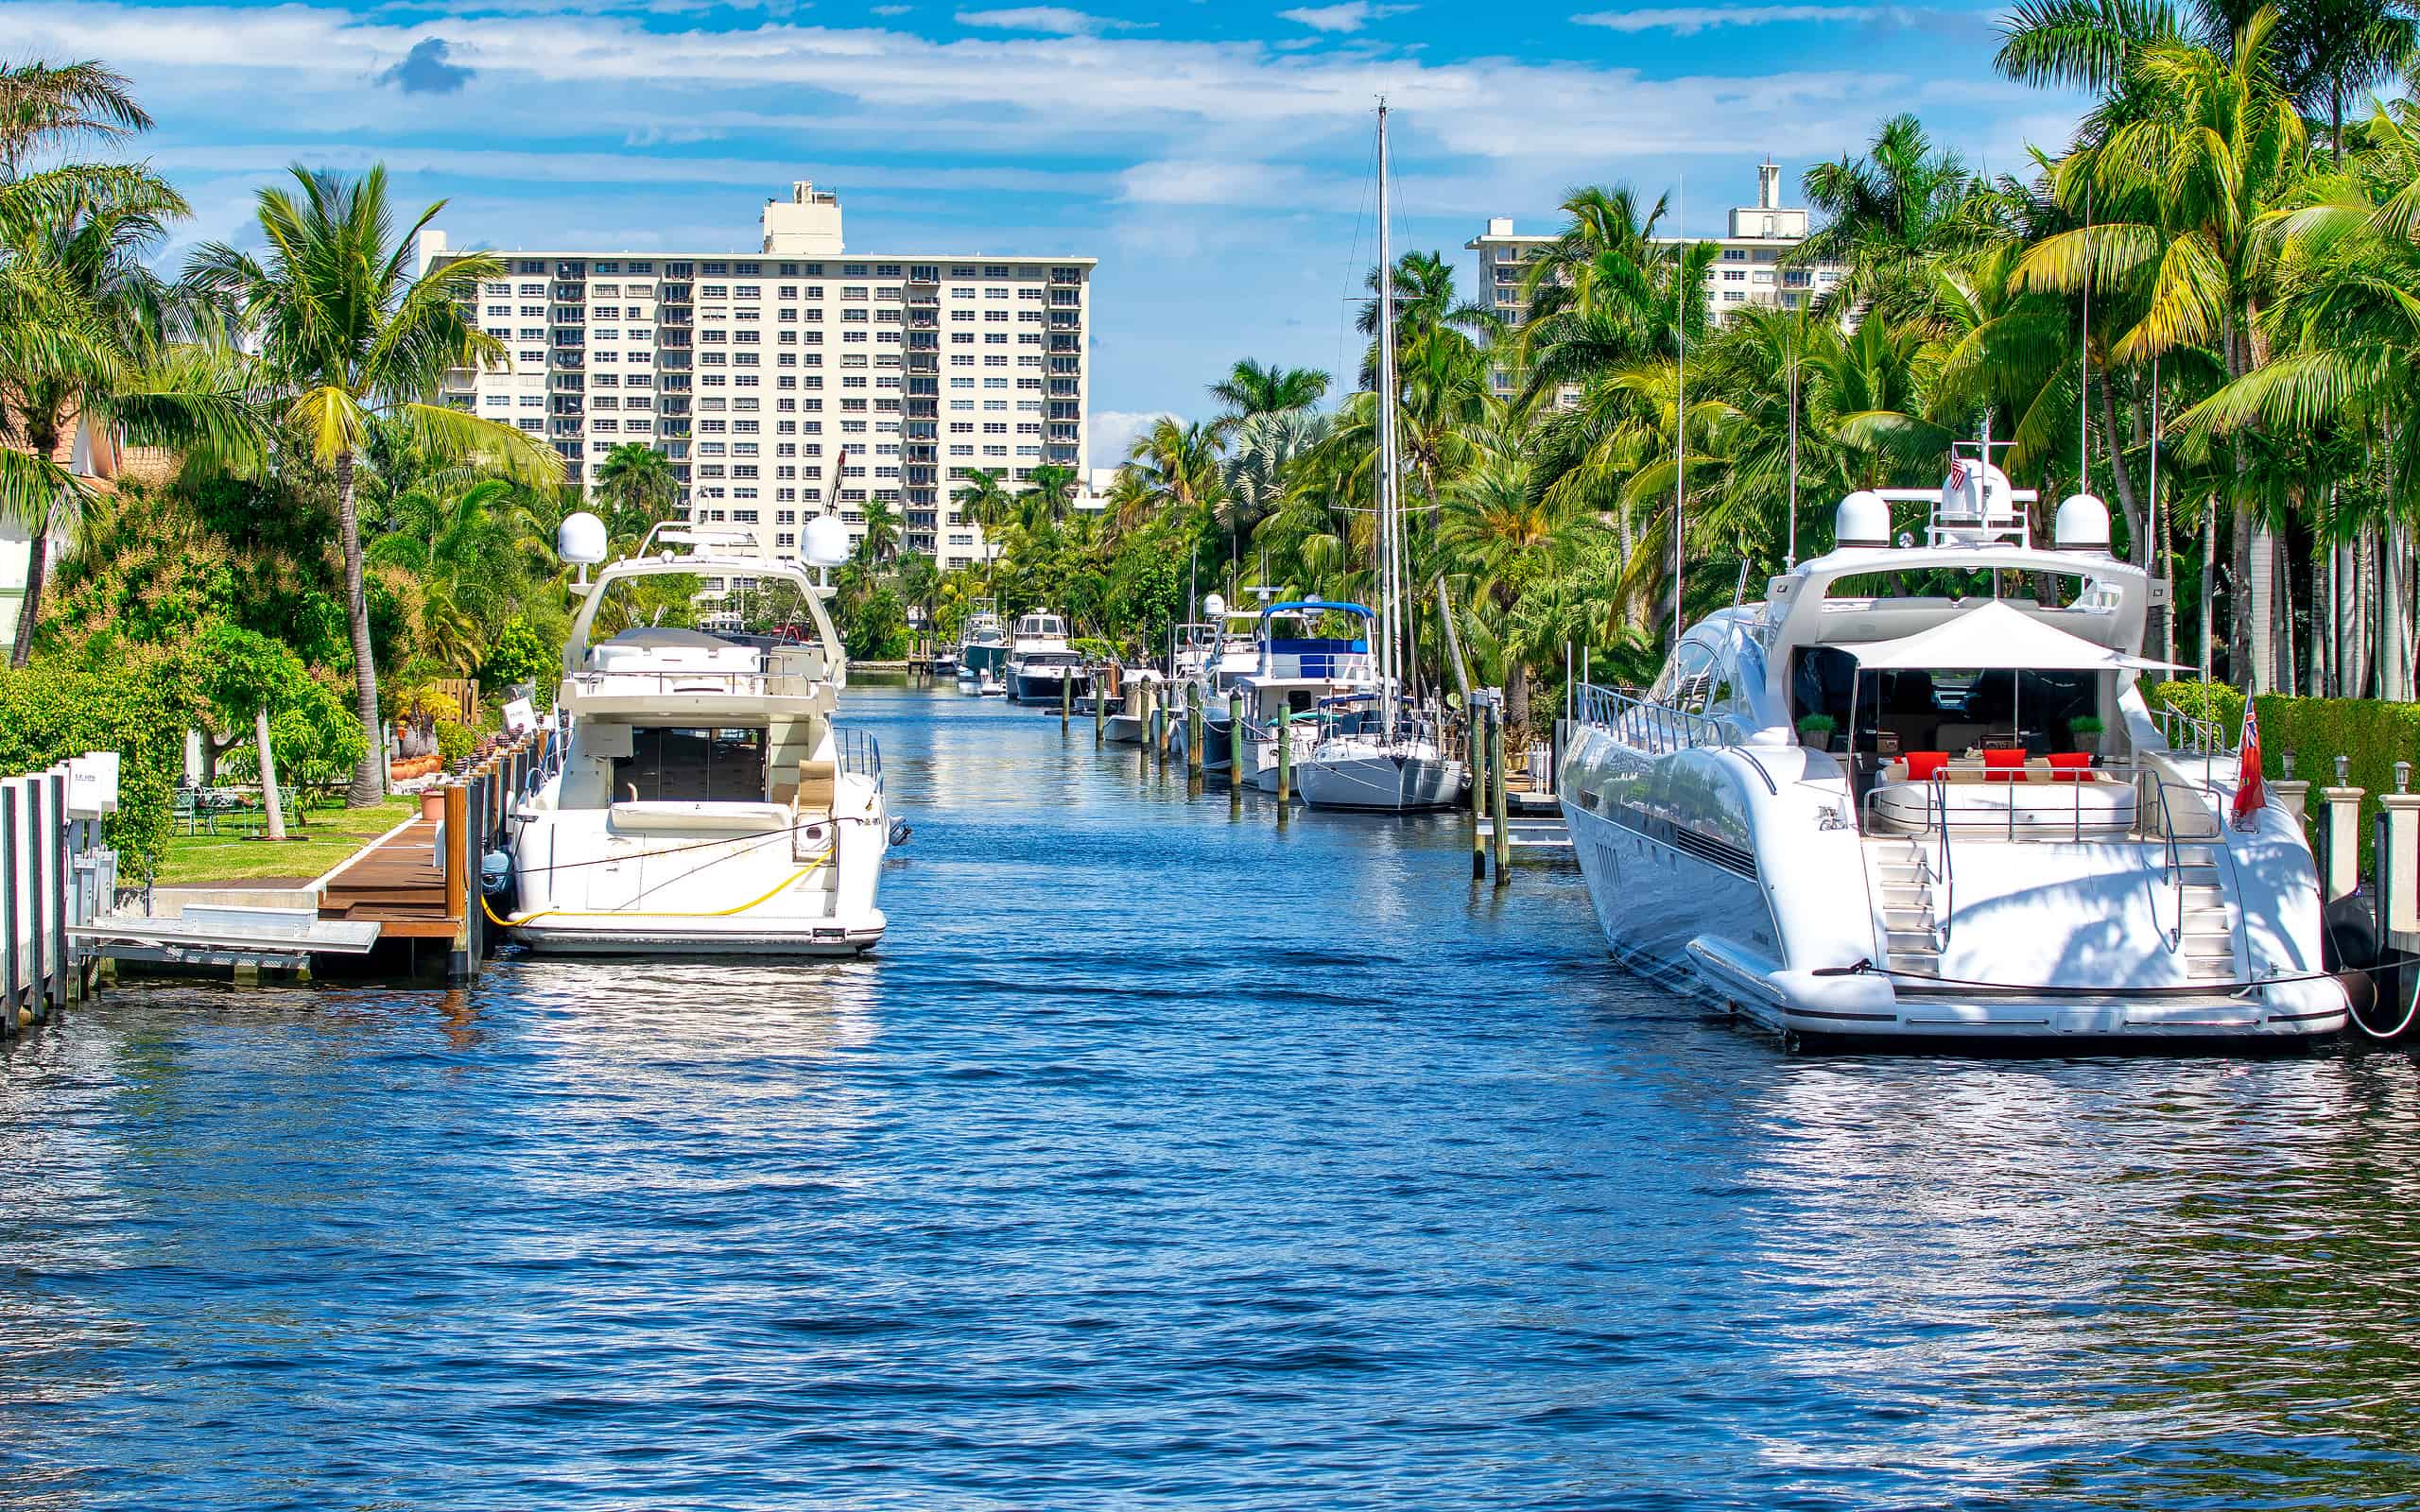 Boats along Fort Lauderdale Canals on a sunny day, Florida.